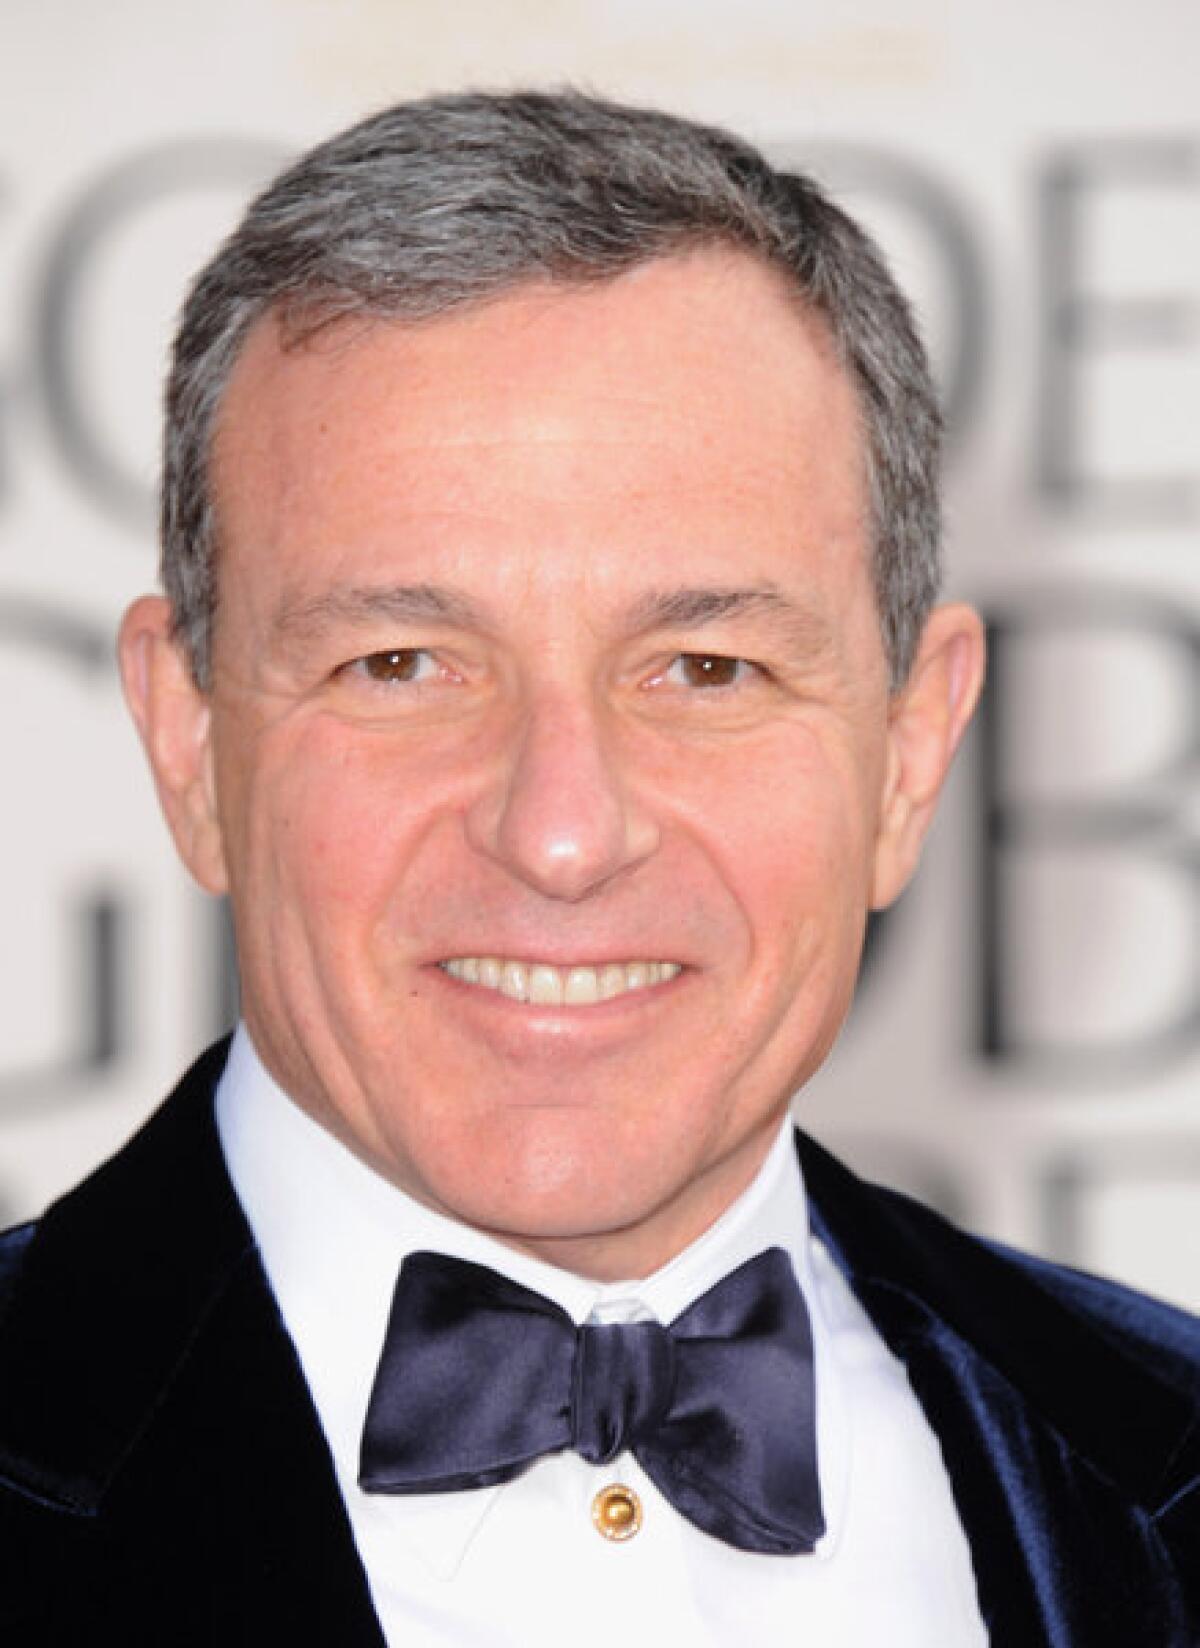 Robert Iger, Walt Disney Company chairman and CEO, arrives at the 70th Annual Golden Globe Awards at the Beverly Hilton Hotel on Jan. 13.